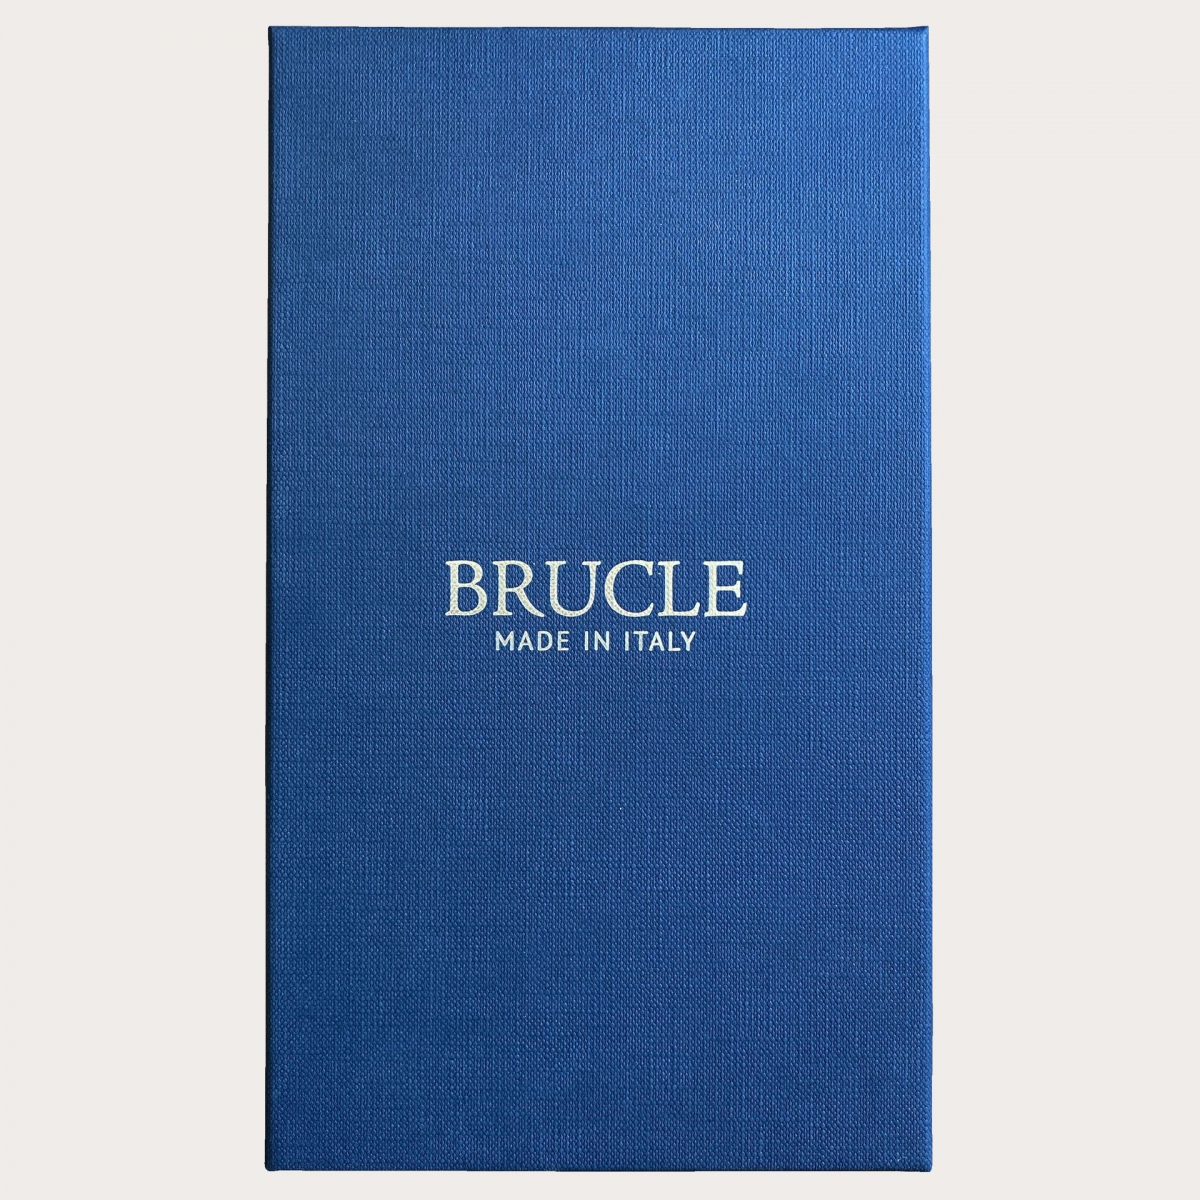 BRUCLE Formal Y-shape fabric suspenders in silk, dotted blue pattern